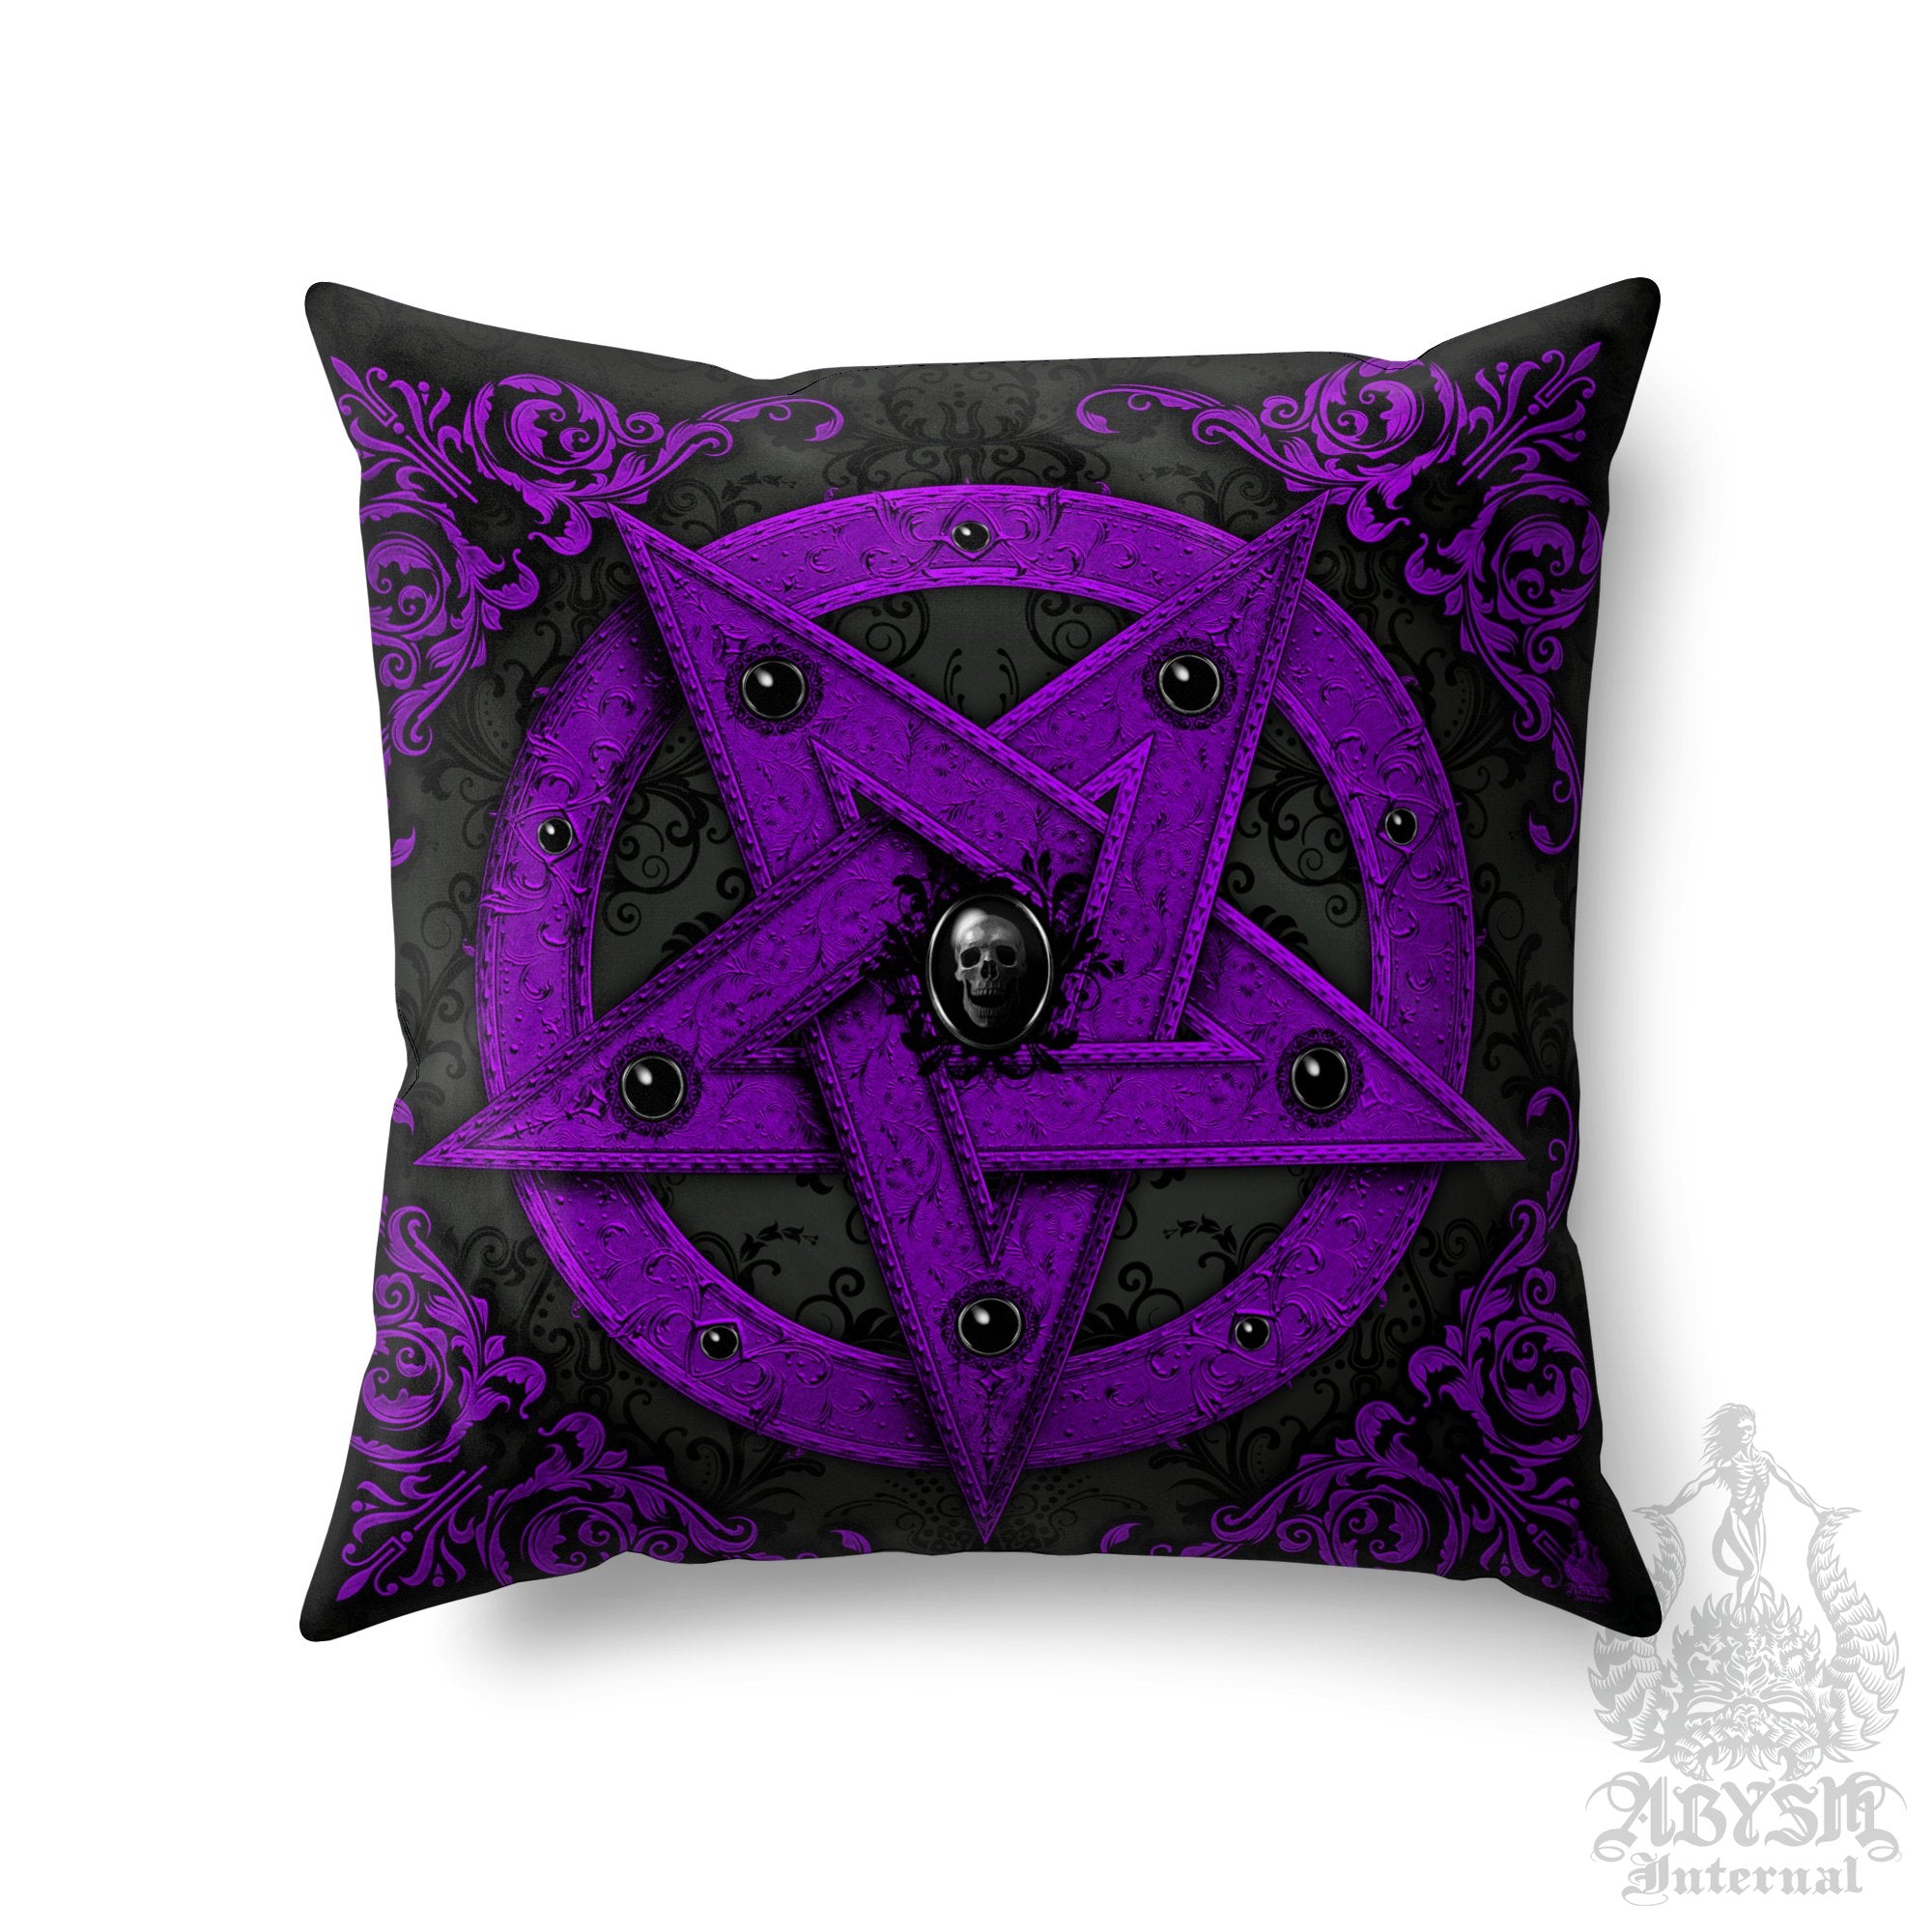 Pastel Goth Throw Pillow, Decorative Accent Pillow, Square Cushion Cover, Purple Pentagram, Satanic Witch Home, Whimsigoth Decor - Abysm Internal